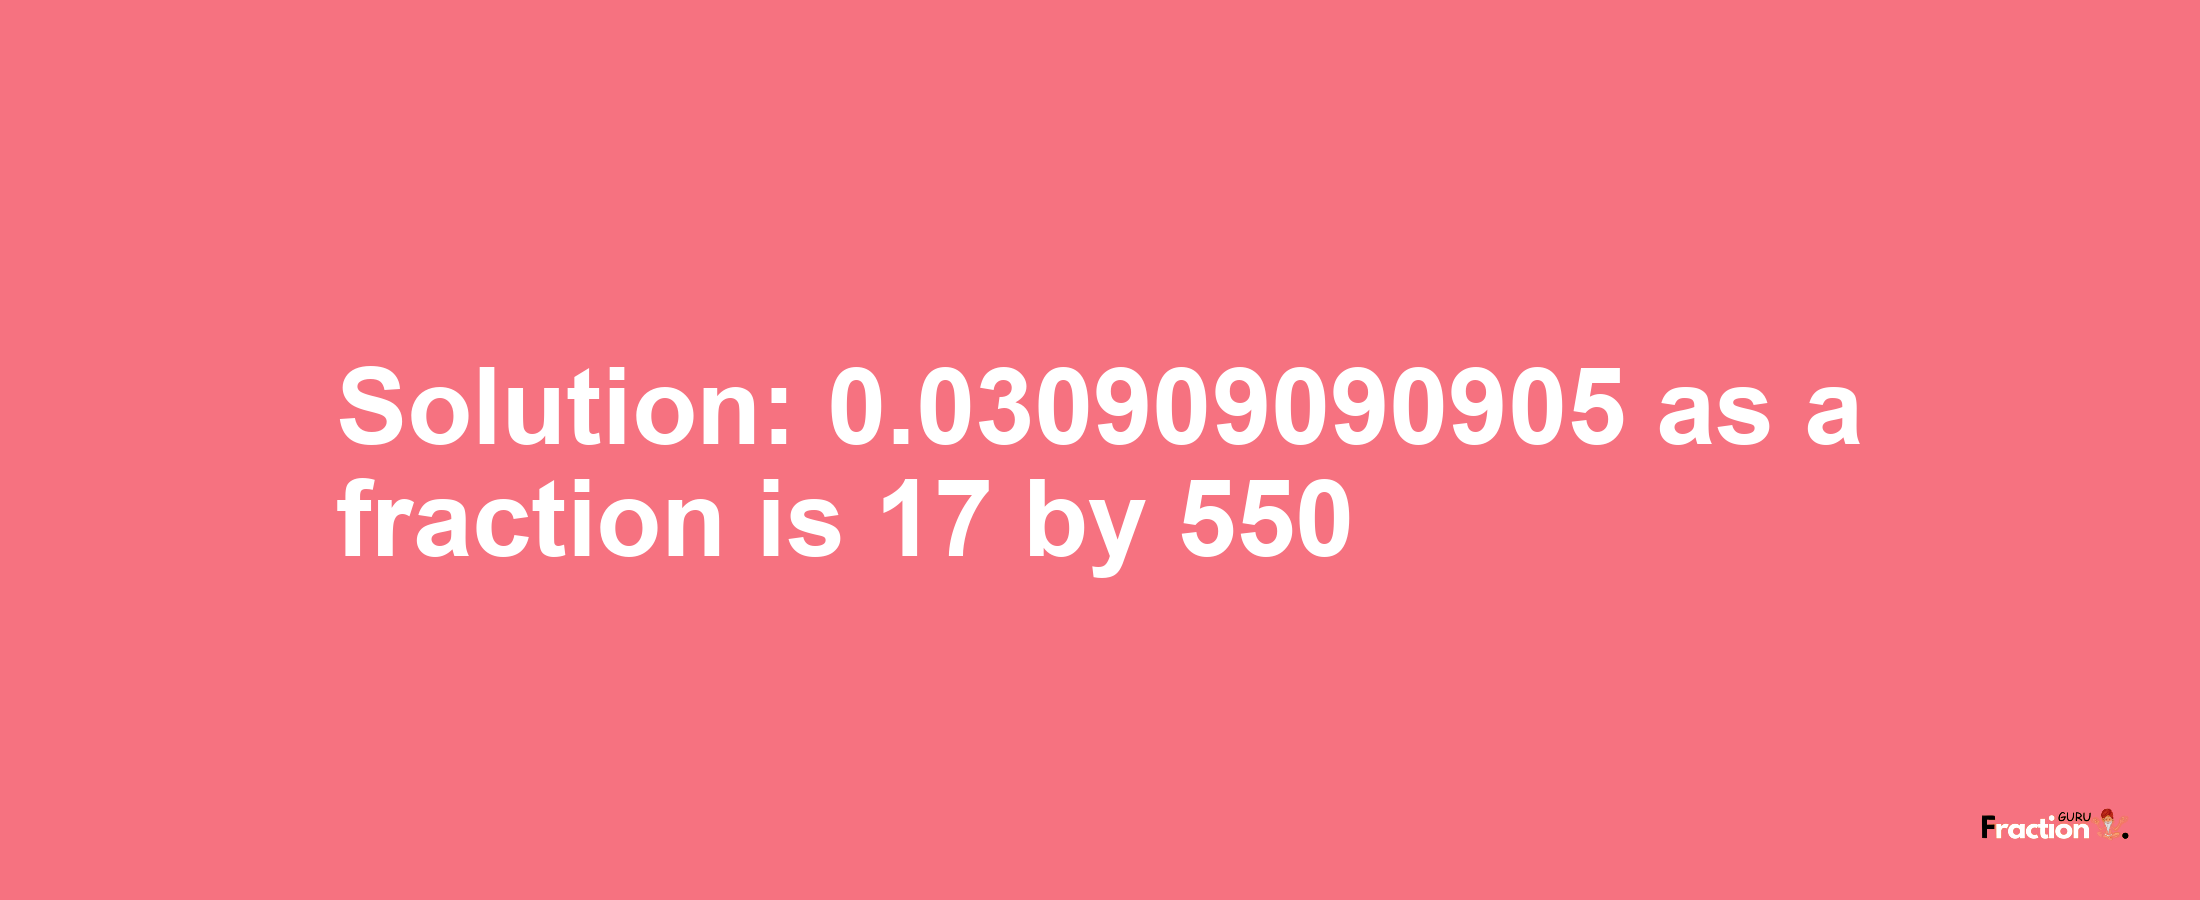 Solution:0.030909090905 as a fraction is 17/550